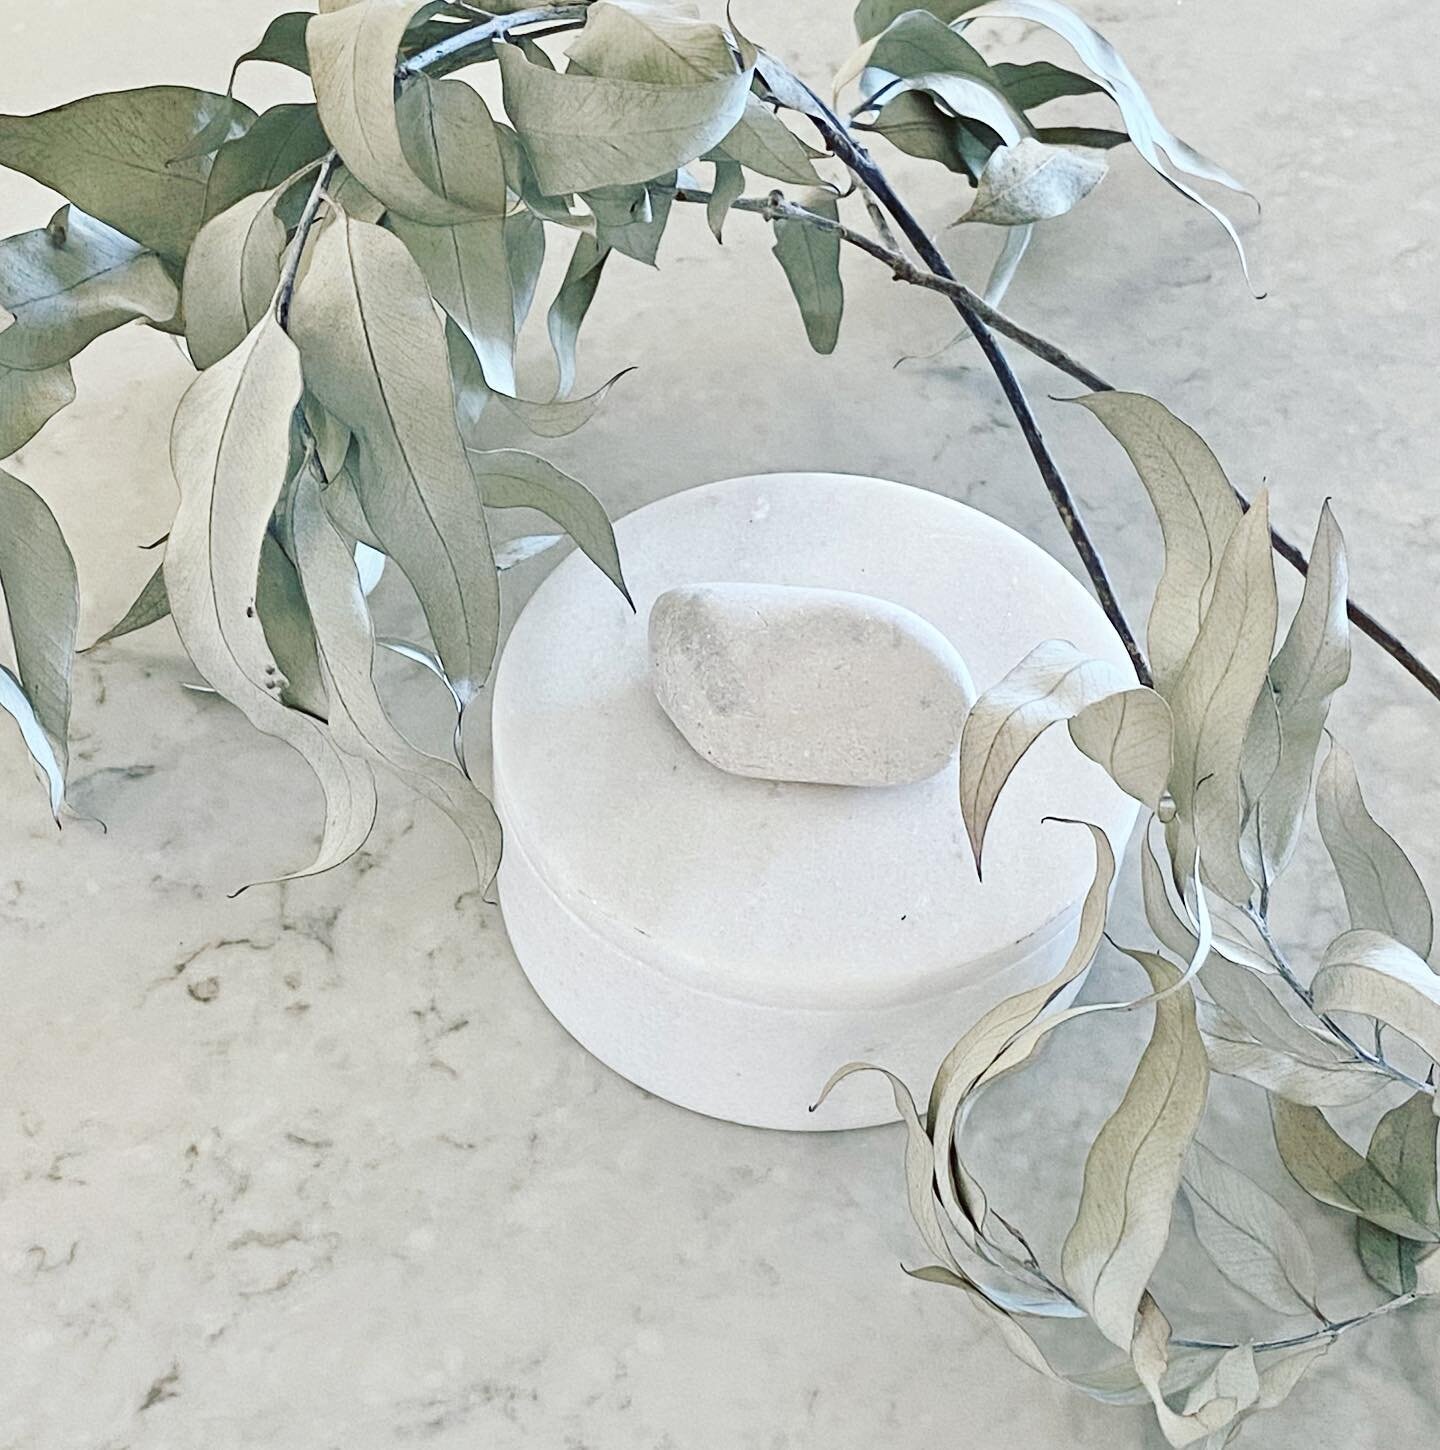 Tonal beauty 

#props #greypalette #calm #colourpalette #propstyling #marble #eucalyptusleaves